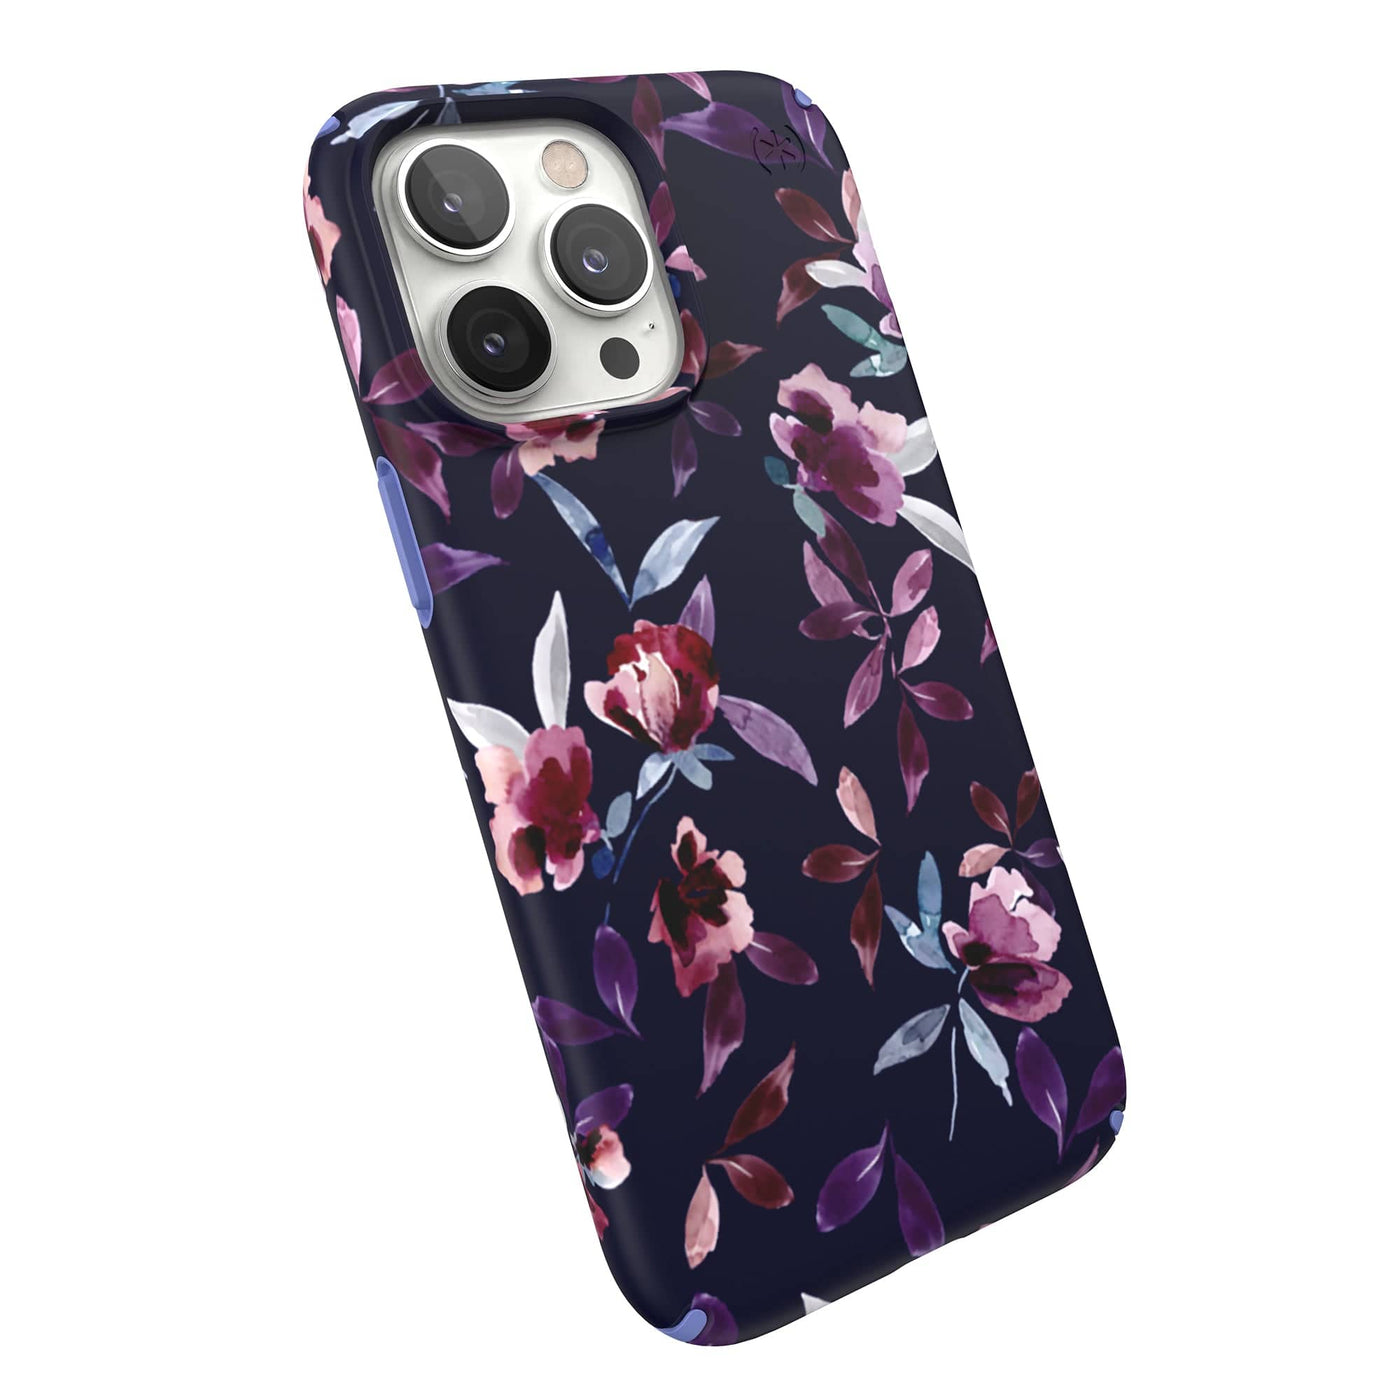 Speck Presidio Edition MagSafe iPhone 14 Pro Max Cases Spring Purple/Violet Floral